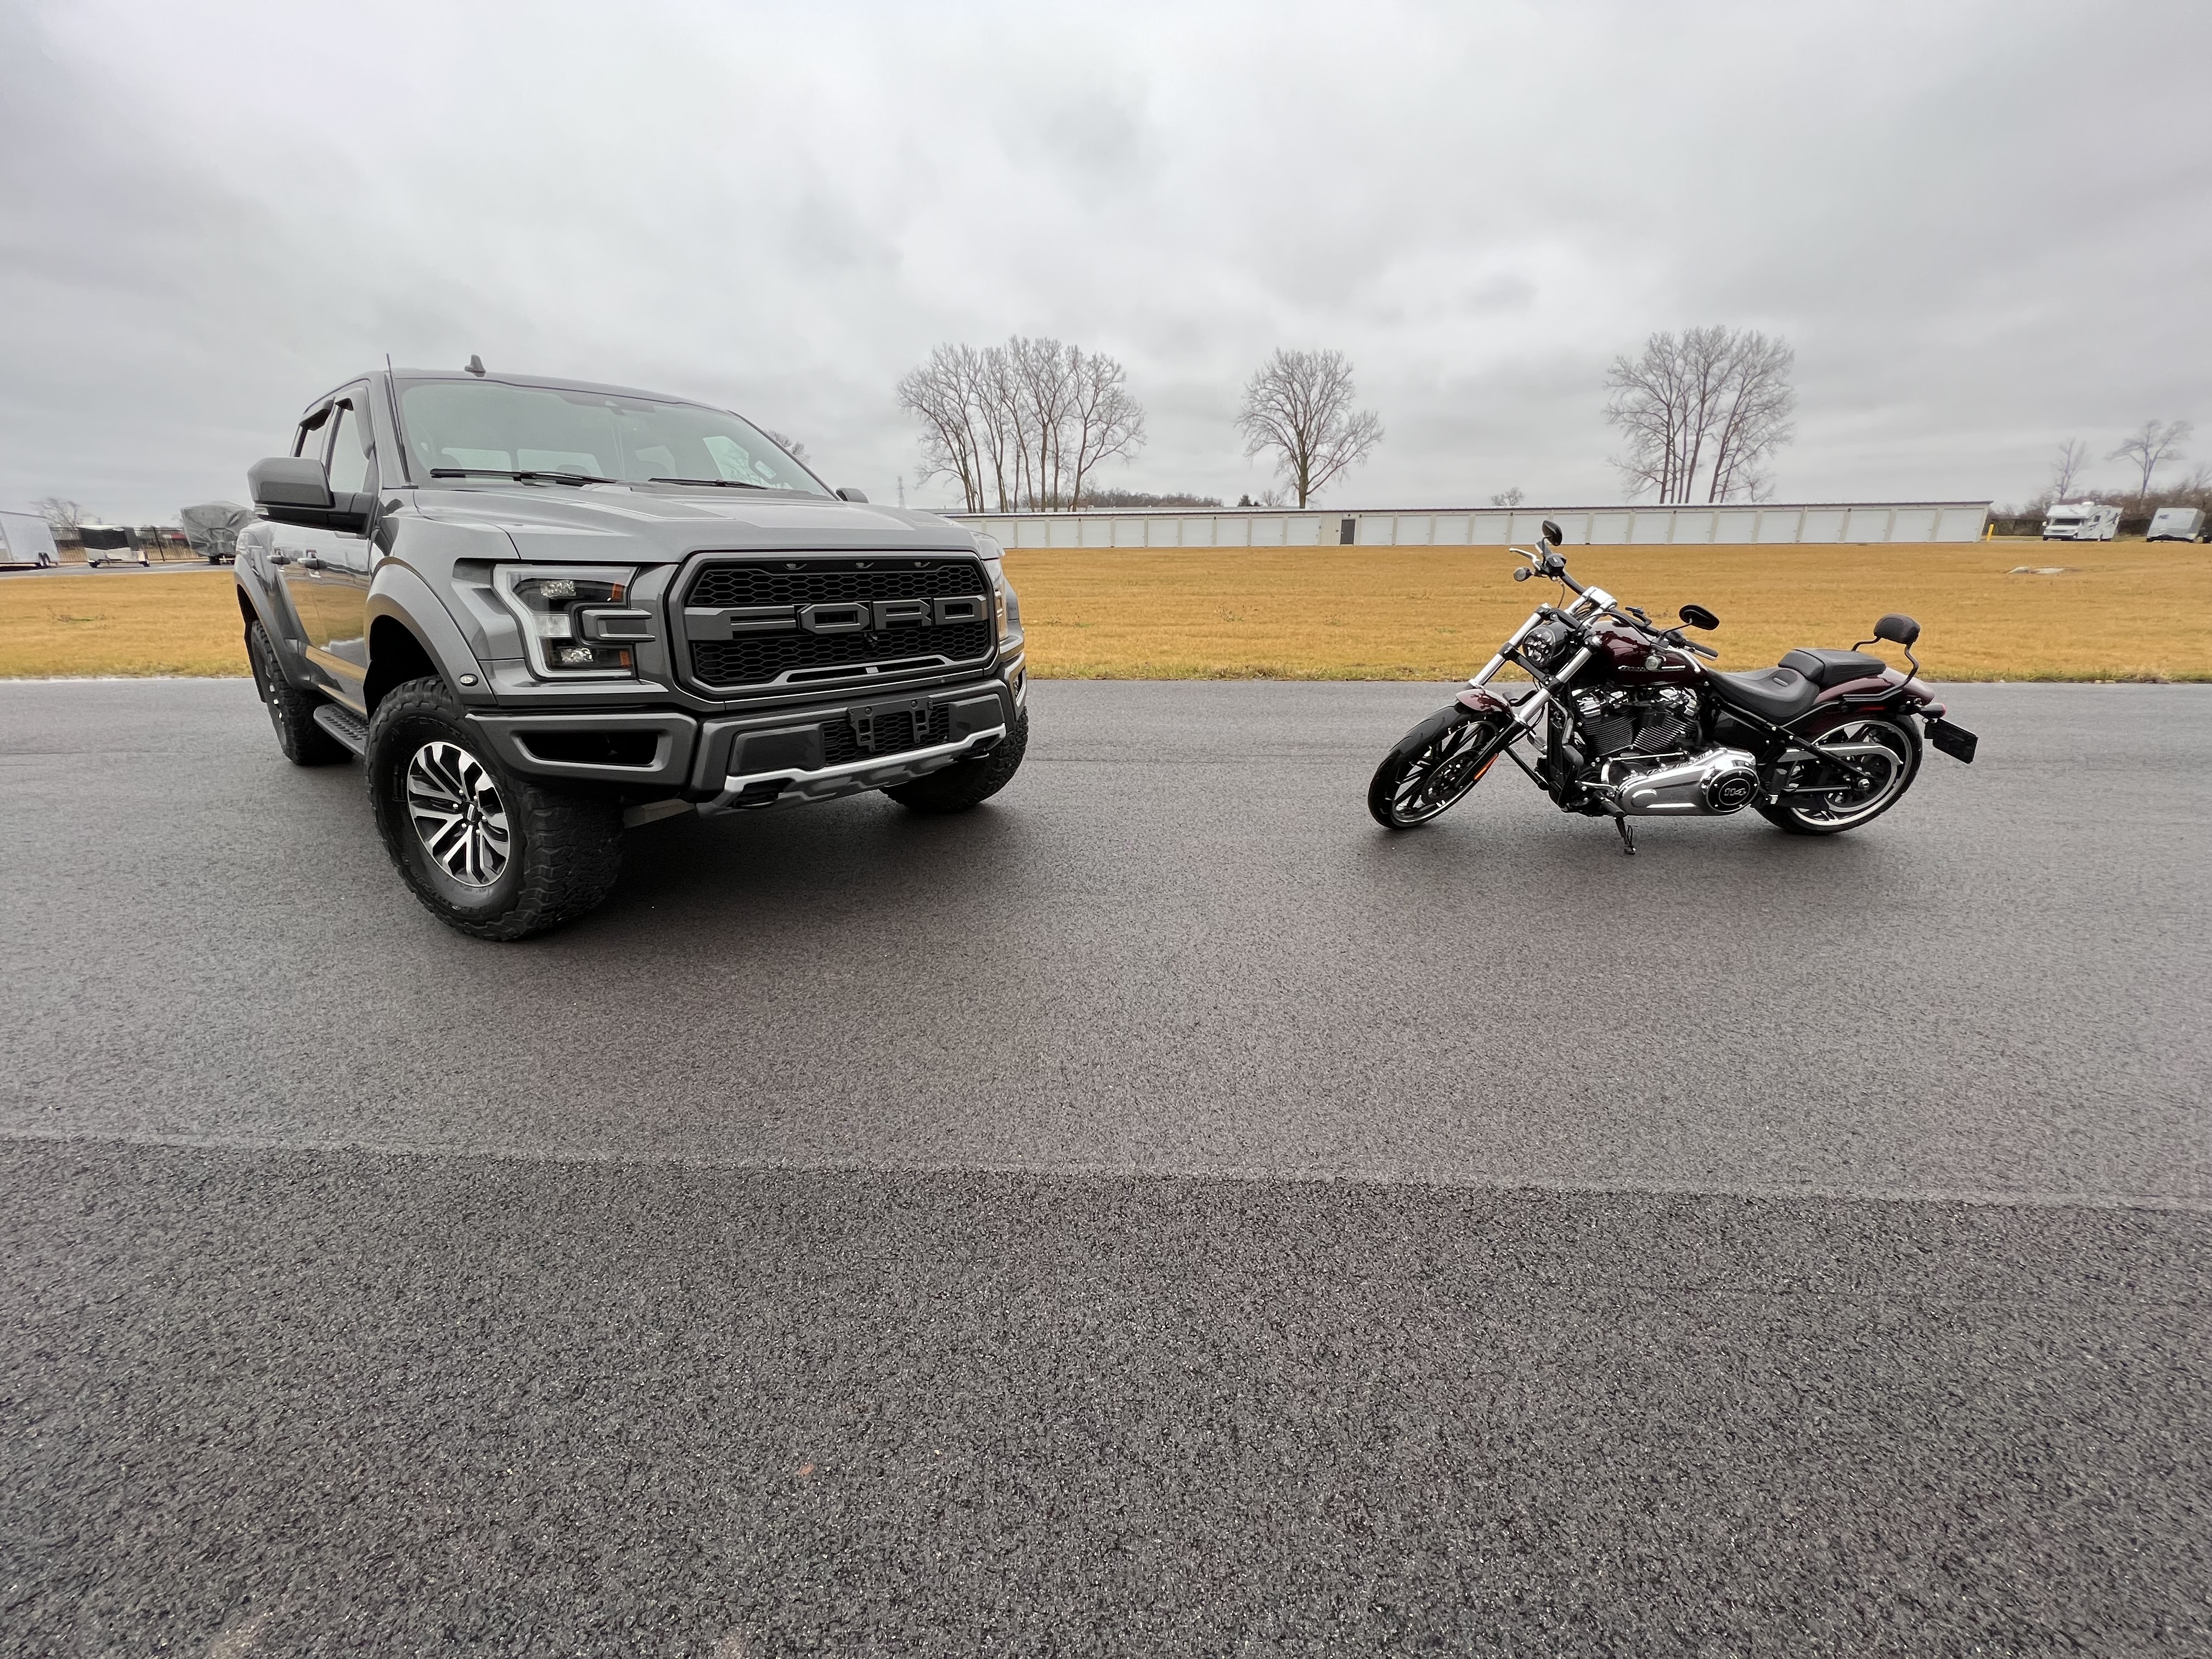 Ford Raptor and Harley Breakout 2